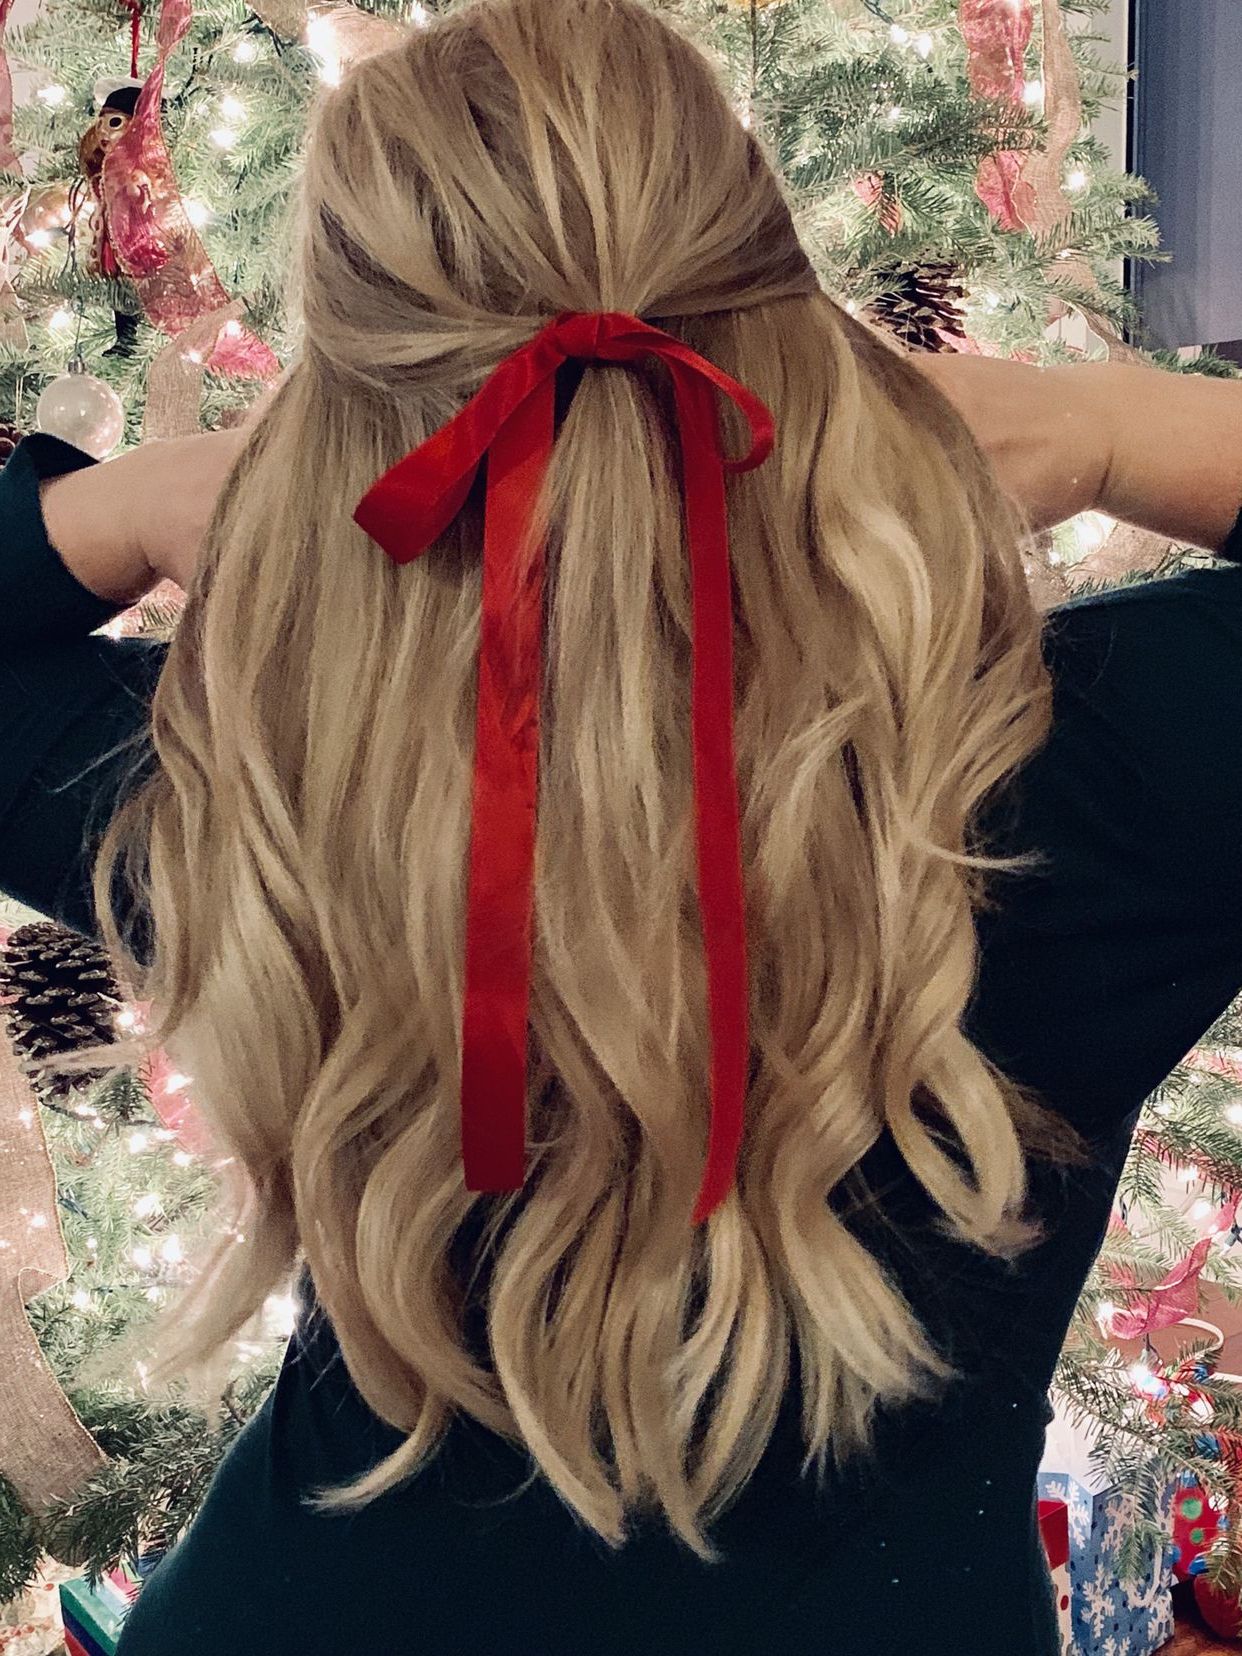 Favorite Loosely Tied Braided Hairstyles With A Ribbon Inside Red Ribbons Are The Perfect Way To Create A Festive Holiday (View 5 of 20)